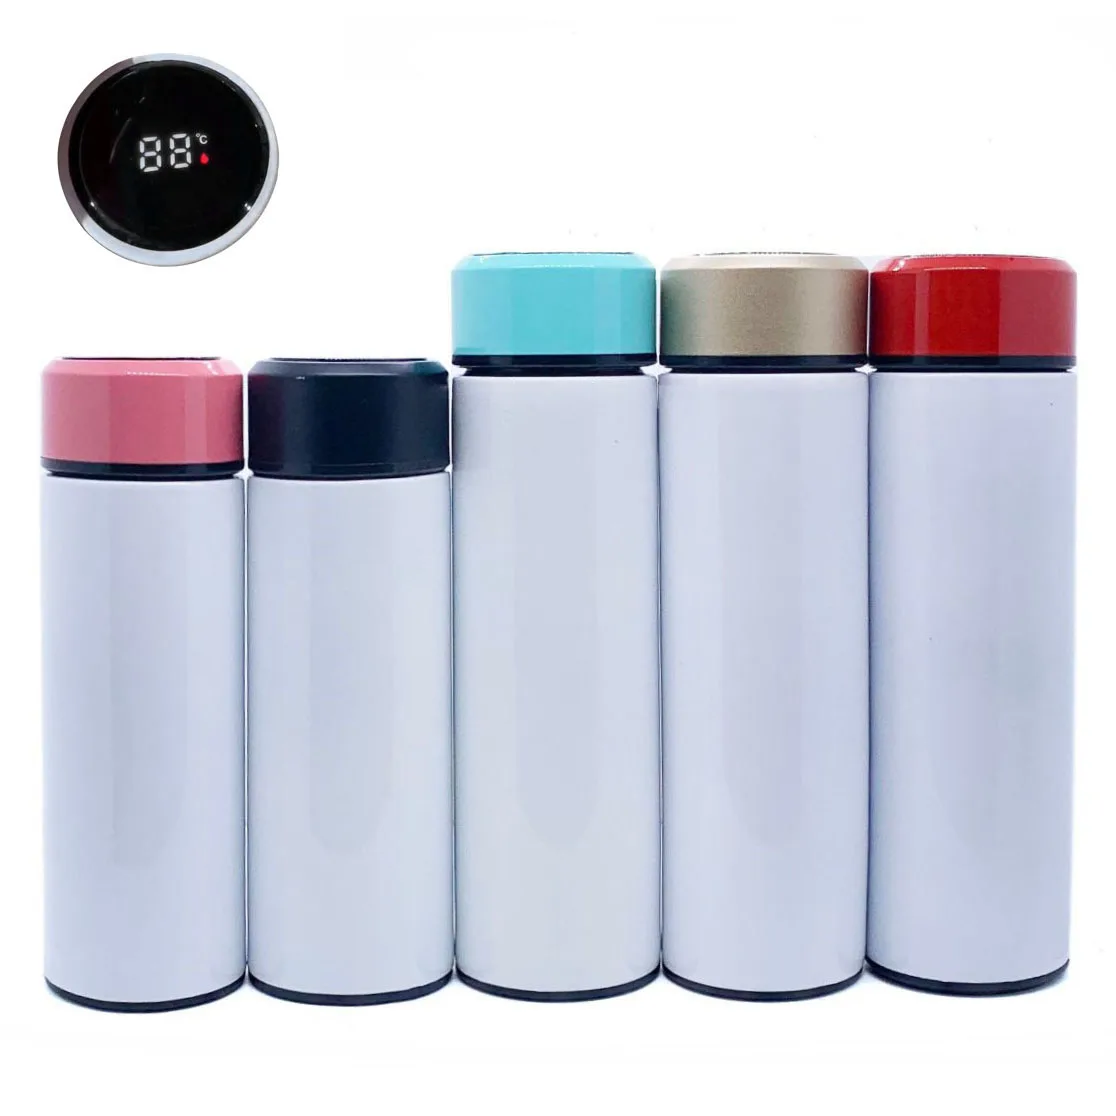 

Seaygift creative 500ml sublimation blank smart temperature vacuum insulated cup flask thermos stainless steel water bottles, White